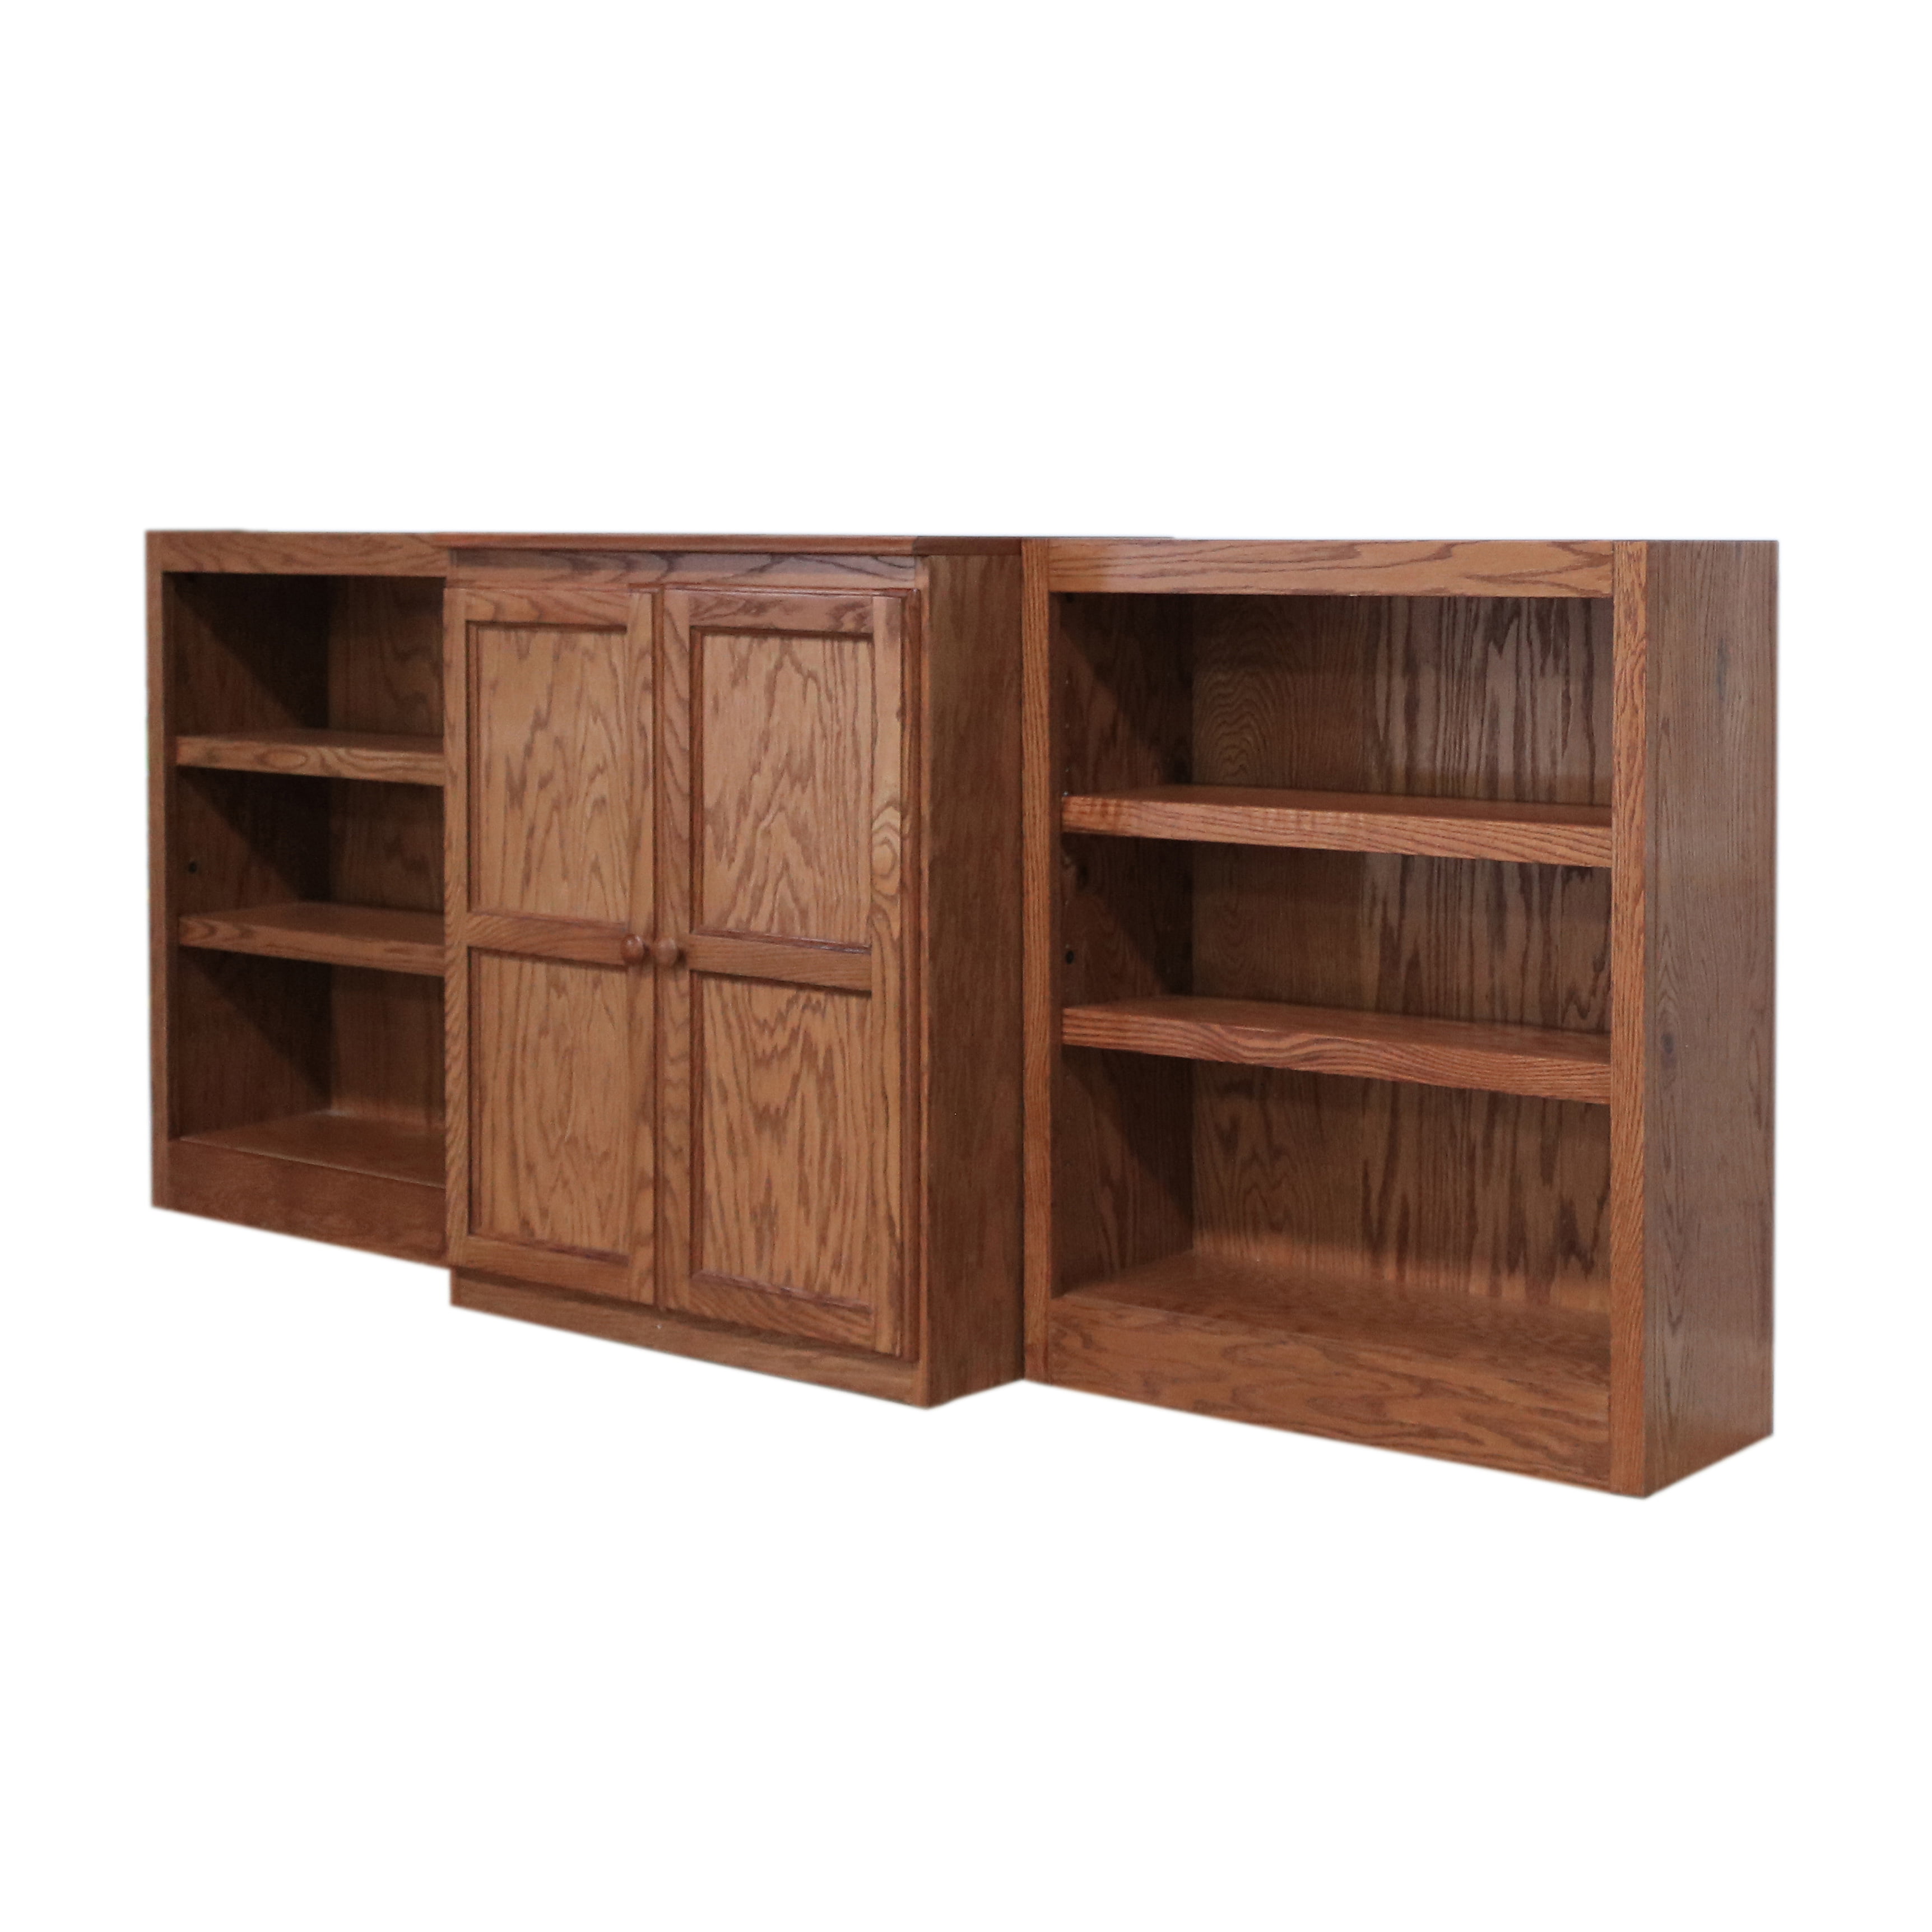 Wood 8 Shelf Bookcase Wall With Doors, 36 Wide Bookcase With Doors